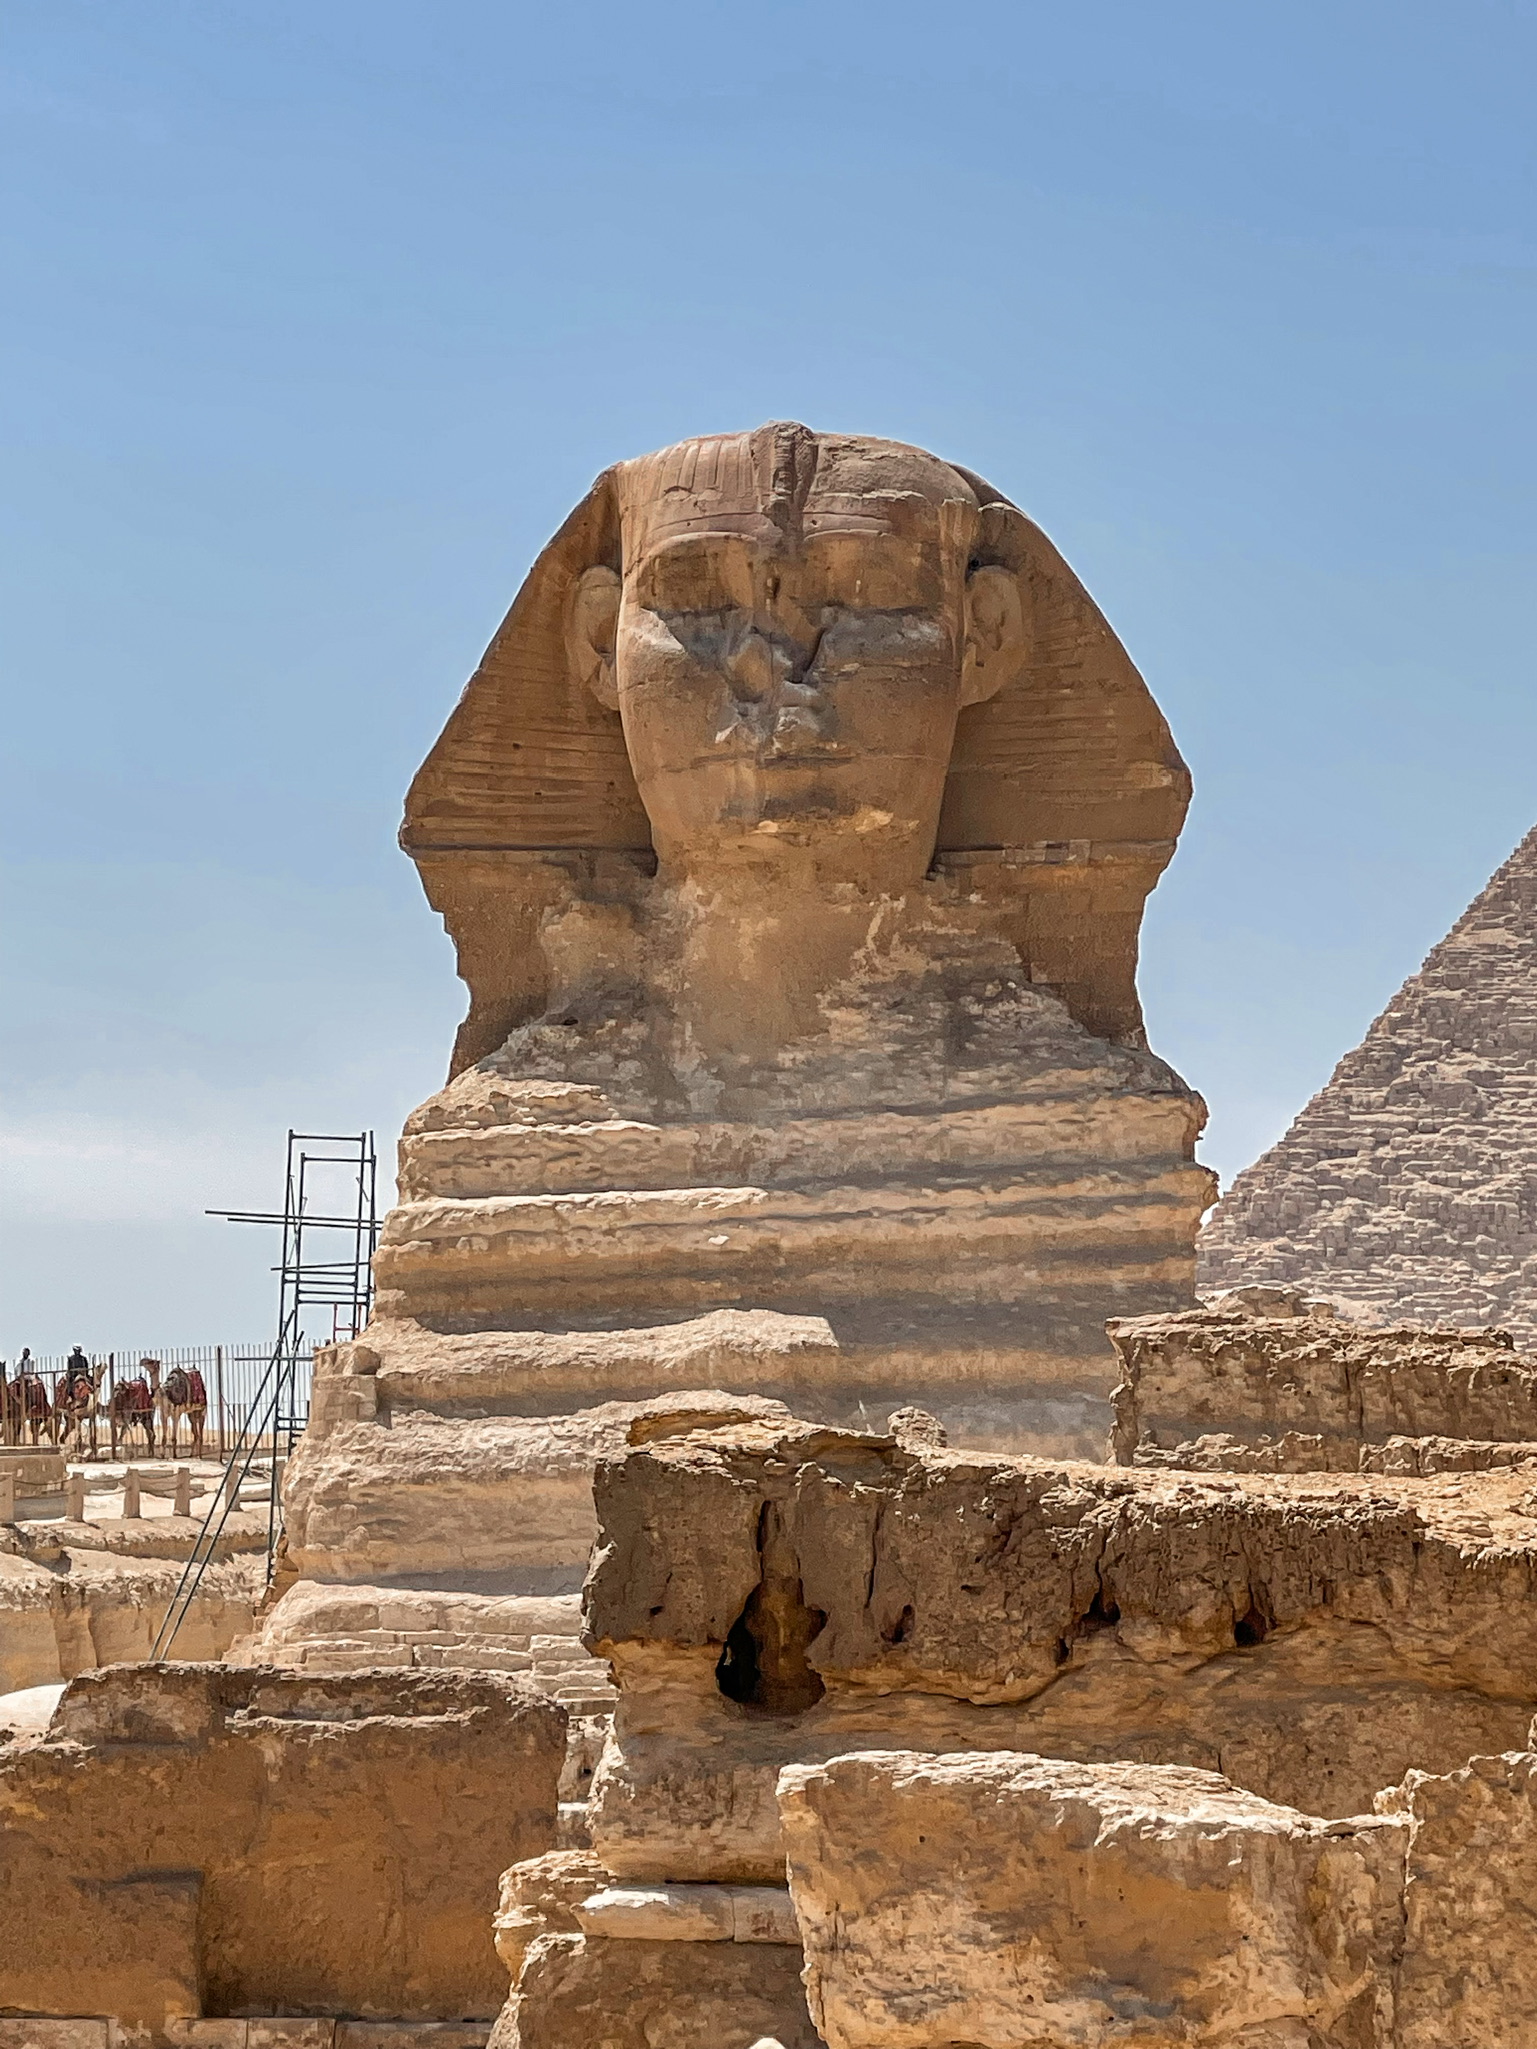 planning a trip to the middle east, where to go in the middle east, how to plan a trip to the middle east, The Great Pyramids of Giza, Egypt, Cairo Egypt, erin busbee, busbee style, busbee family travels, cairo trip, great pyramids of giza trip, sphinx in egypt